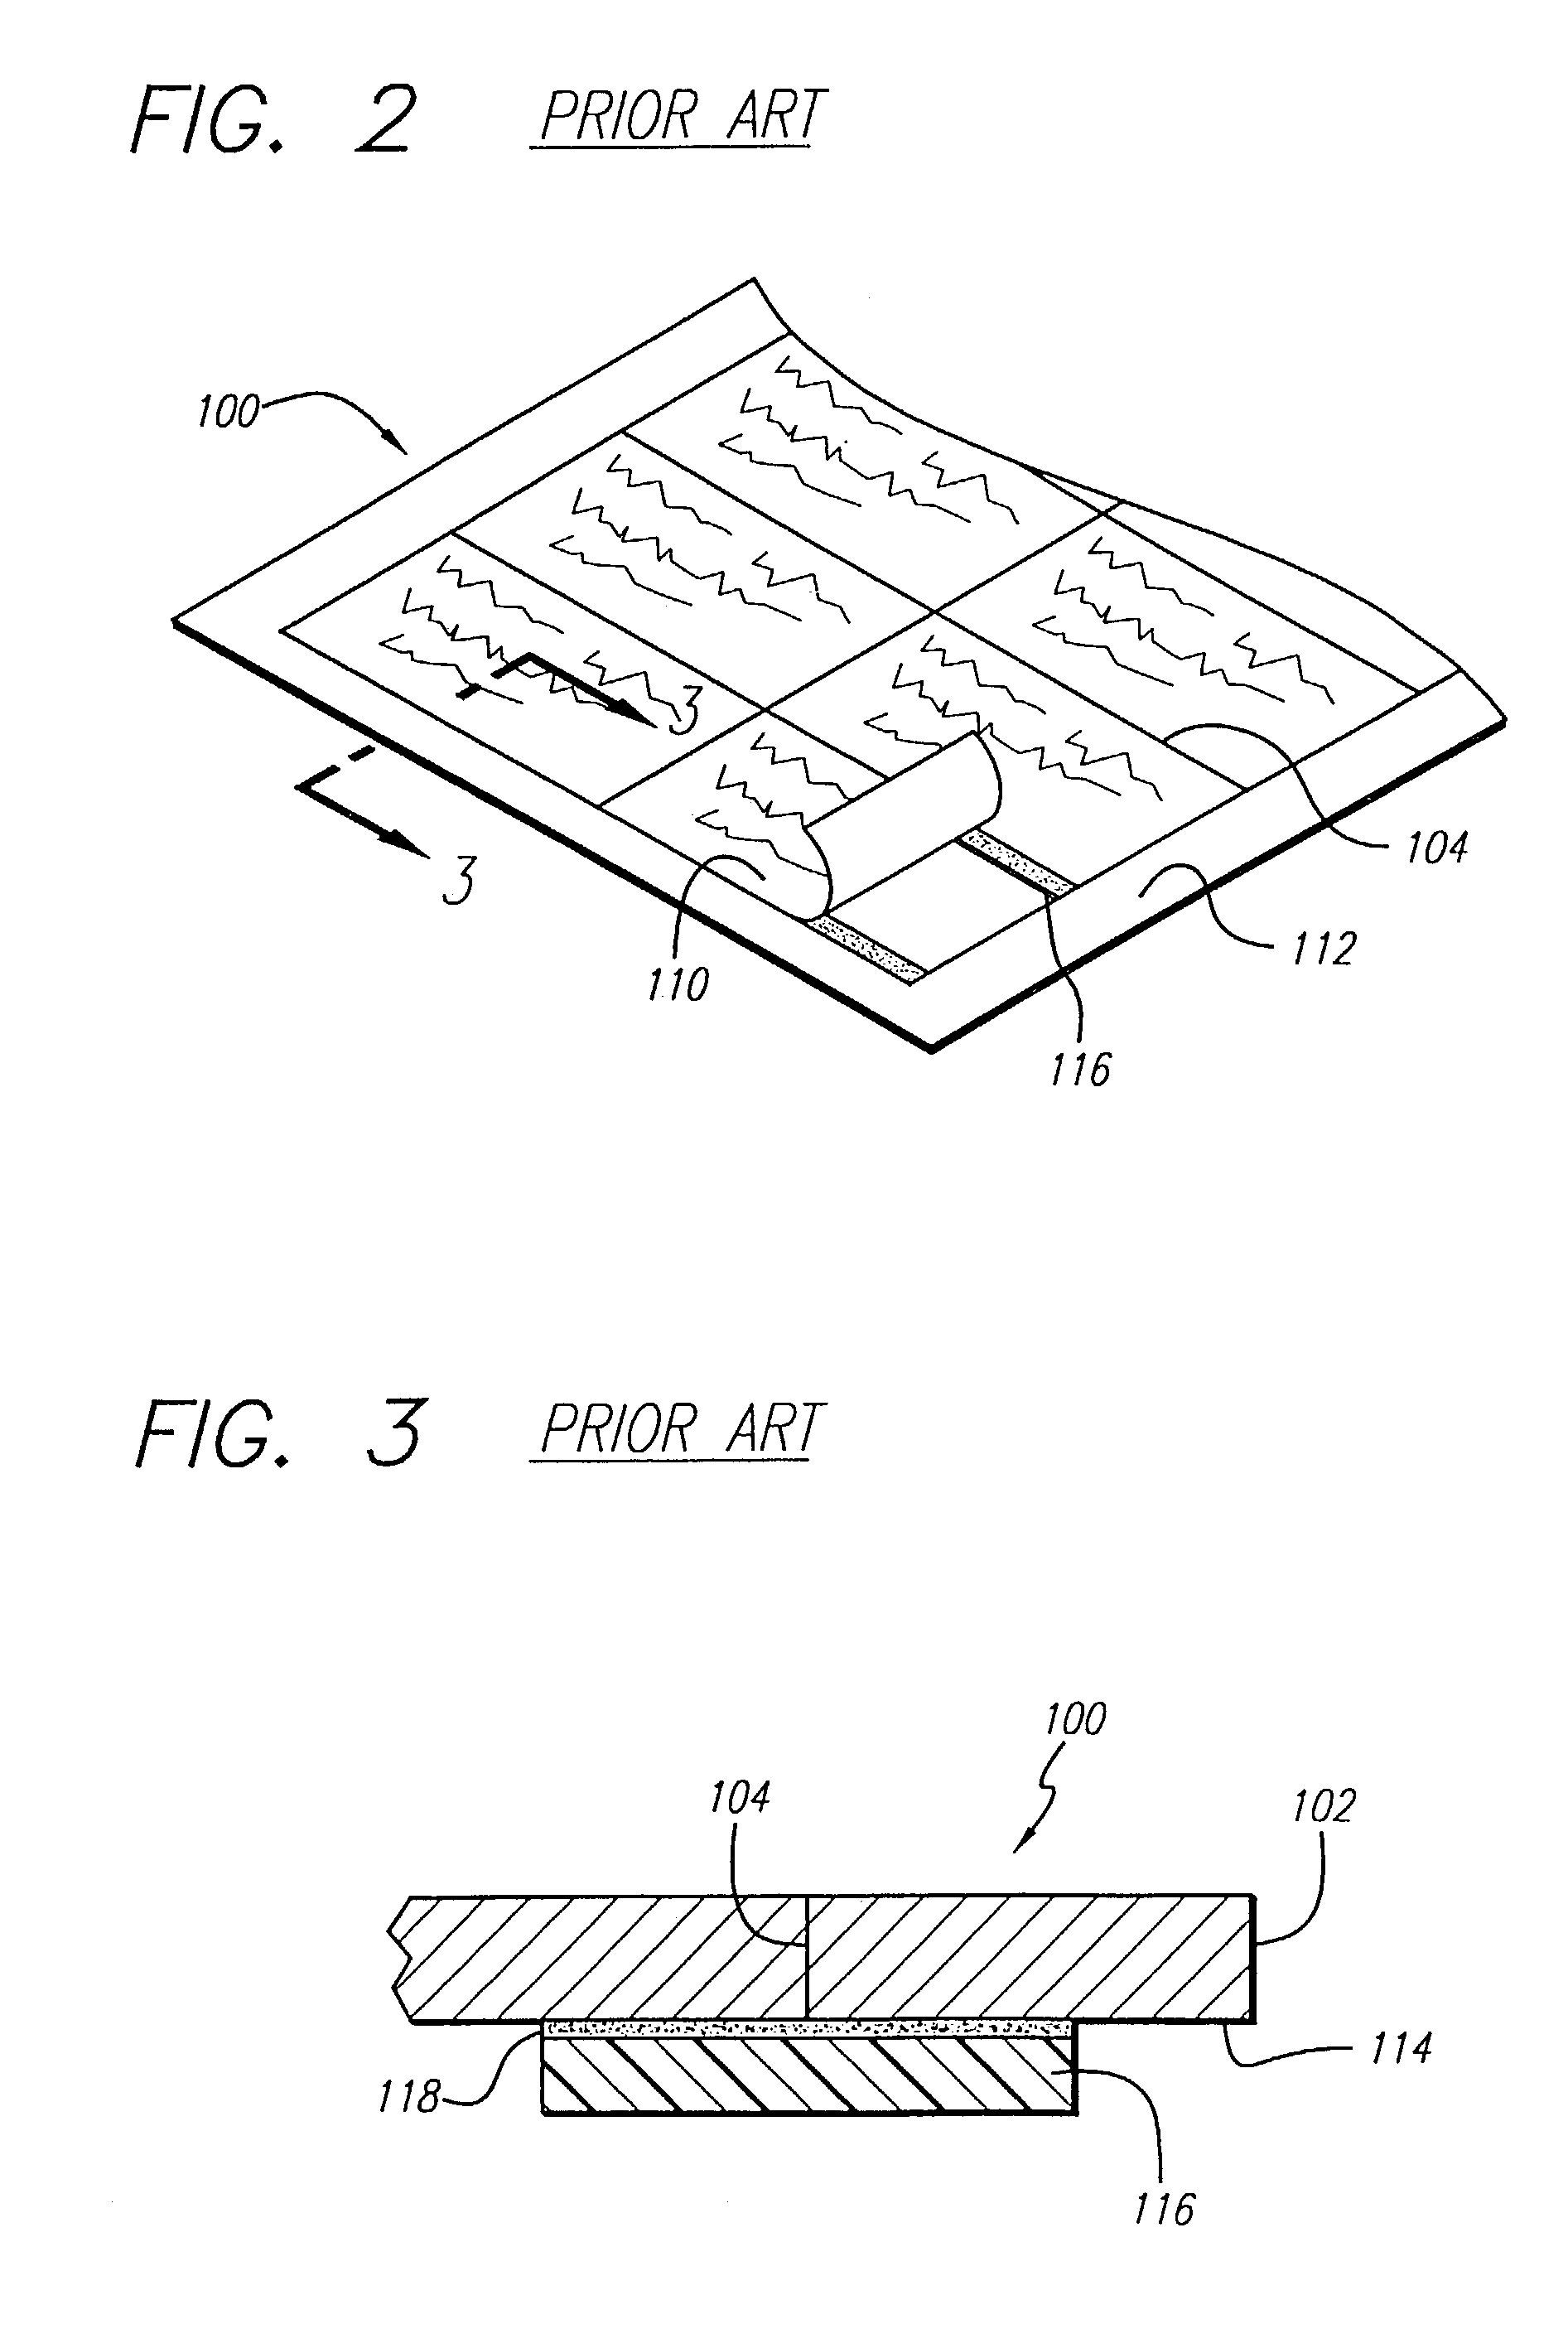 Method of forming a sheet of printable media